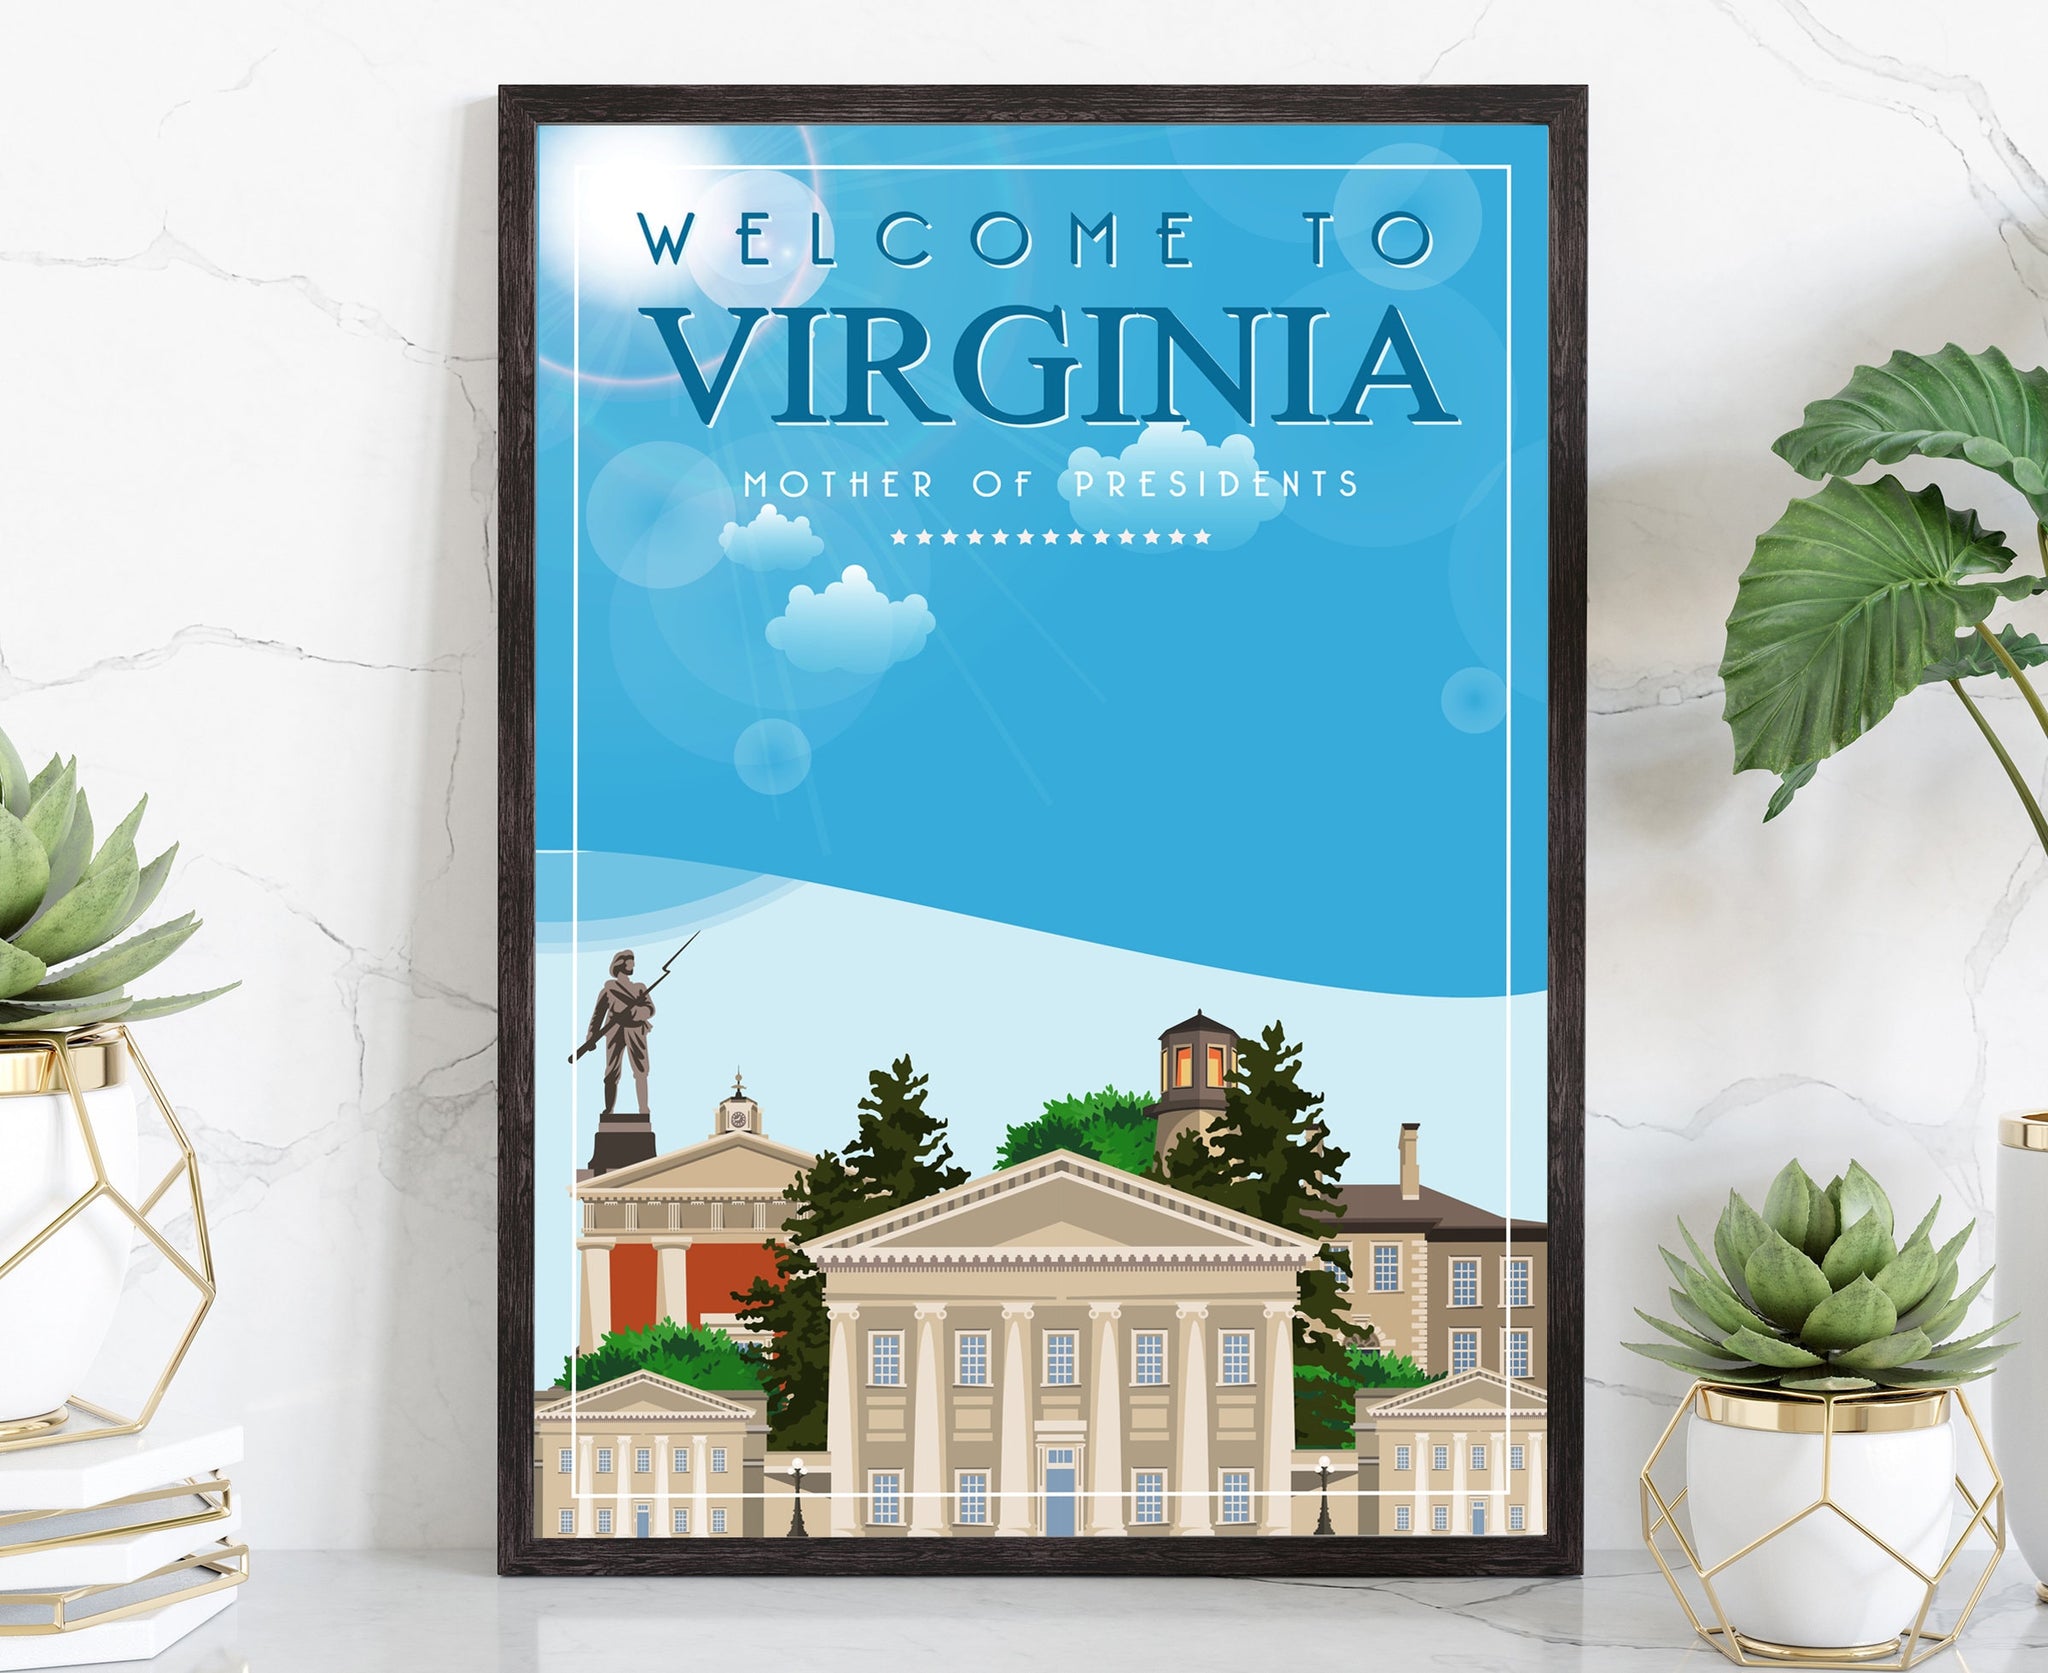 Retro Style Travel Poster, Virginia Vintage Rustic Poster Print, Home Wall Art, Office Wall Decoration, Posters, Virginia, State Map Poster